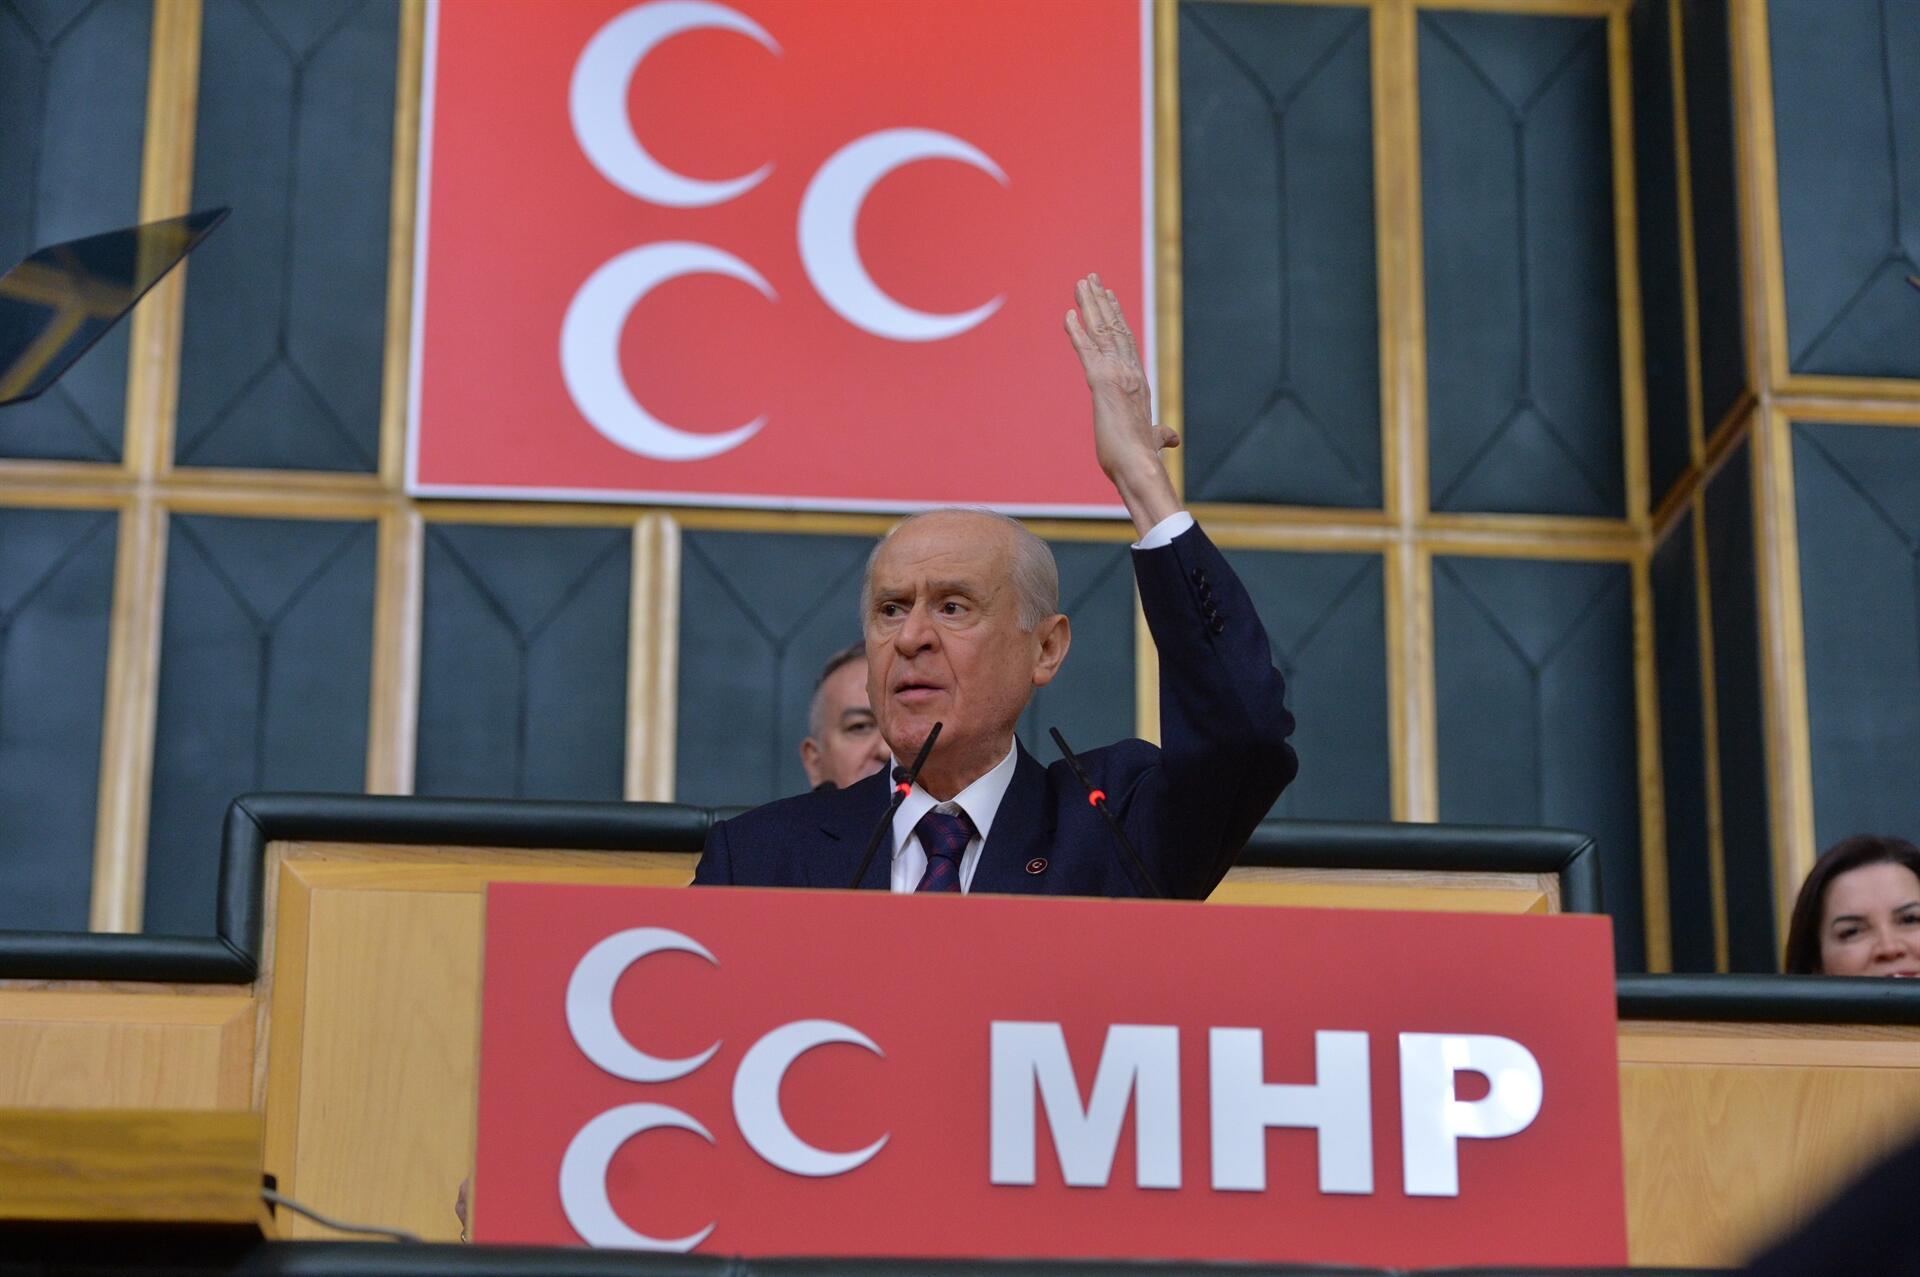 MHP leader urges revising relations with Moscow - Türkiye News